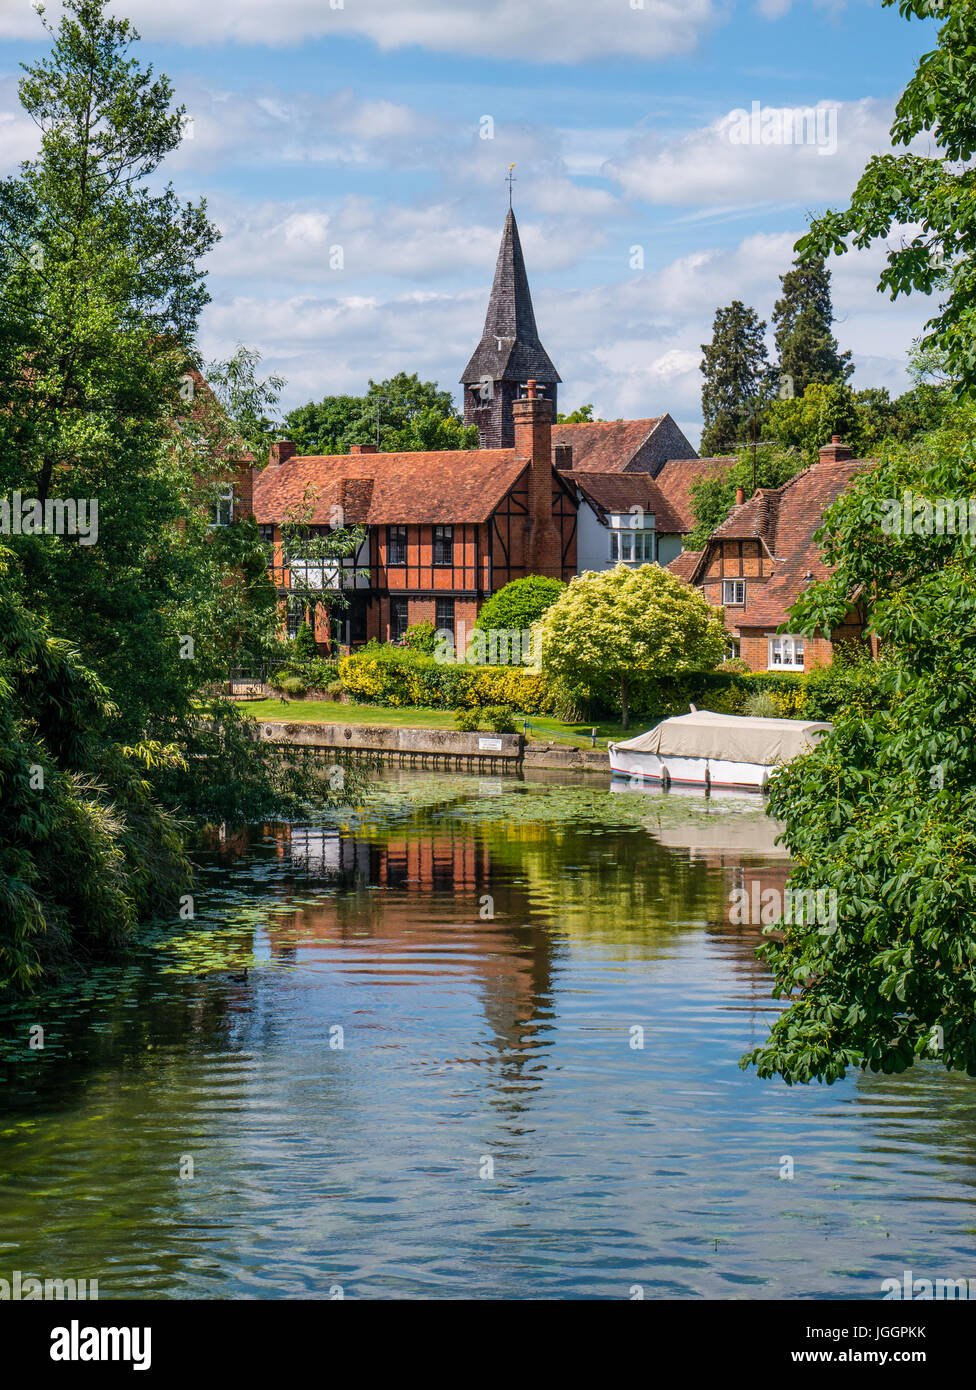 Whitchurch-on-Thames, River Thames, Oxfordshire, England, UK, GB. Stock Photo